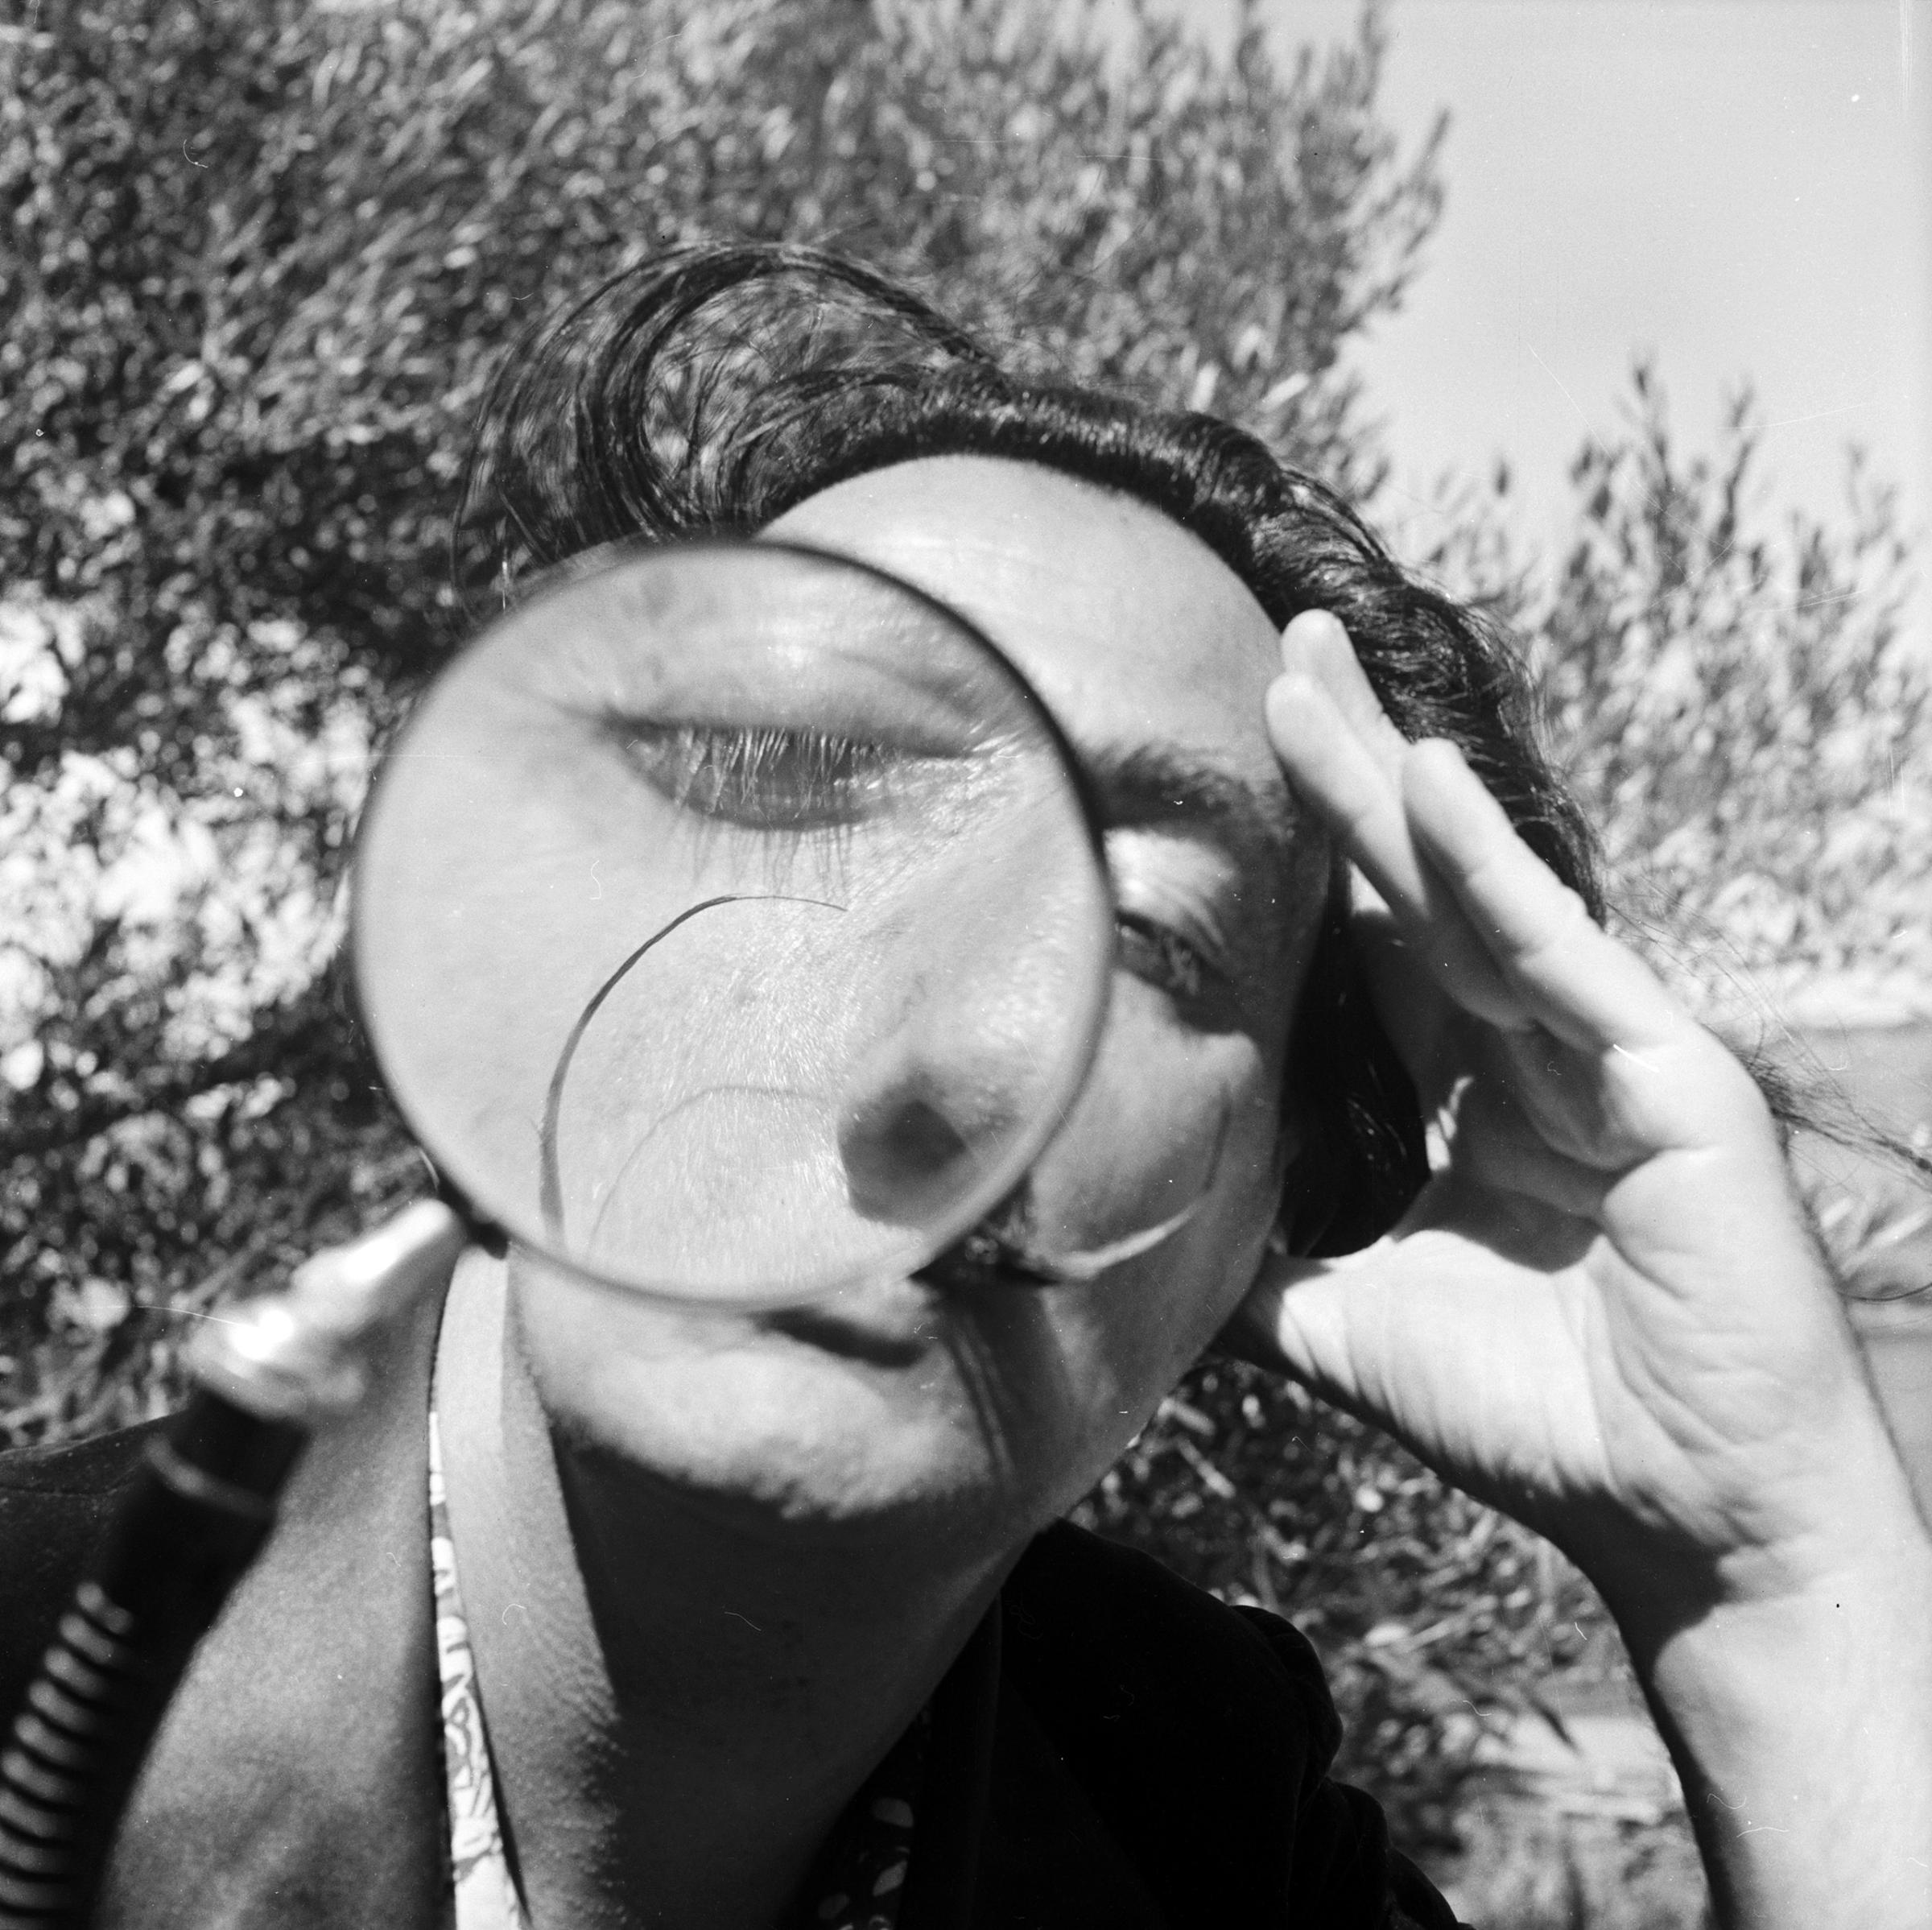 Salvador Dali viewing the camera through a magnifying glass at his home in Cadaques on the Spanish Costa Brava. 1955.